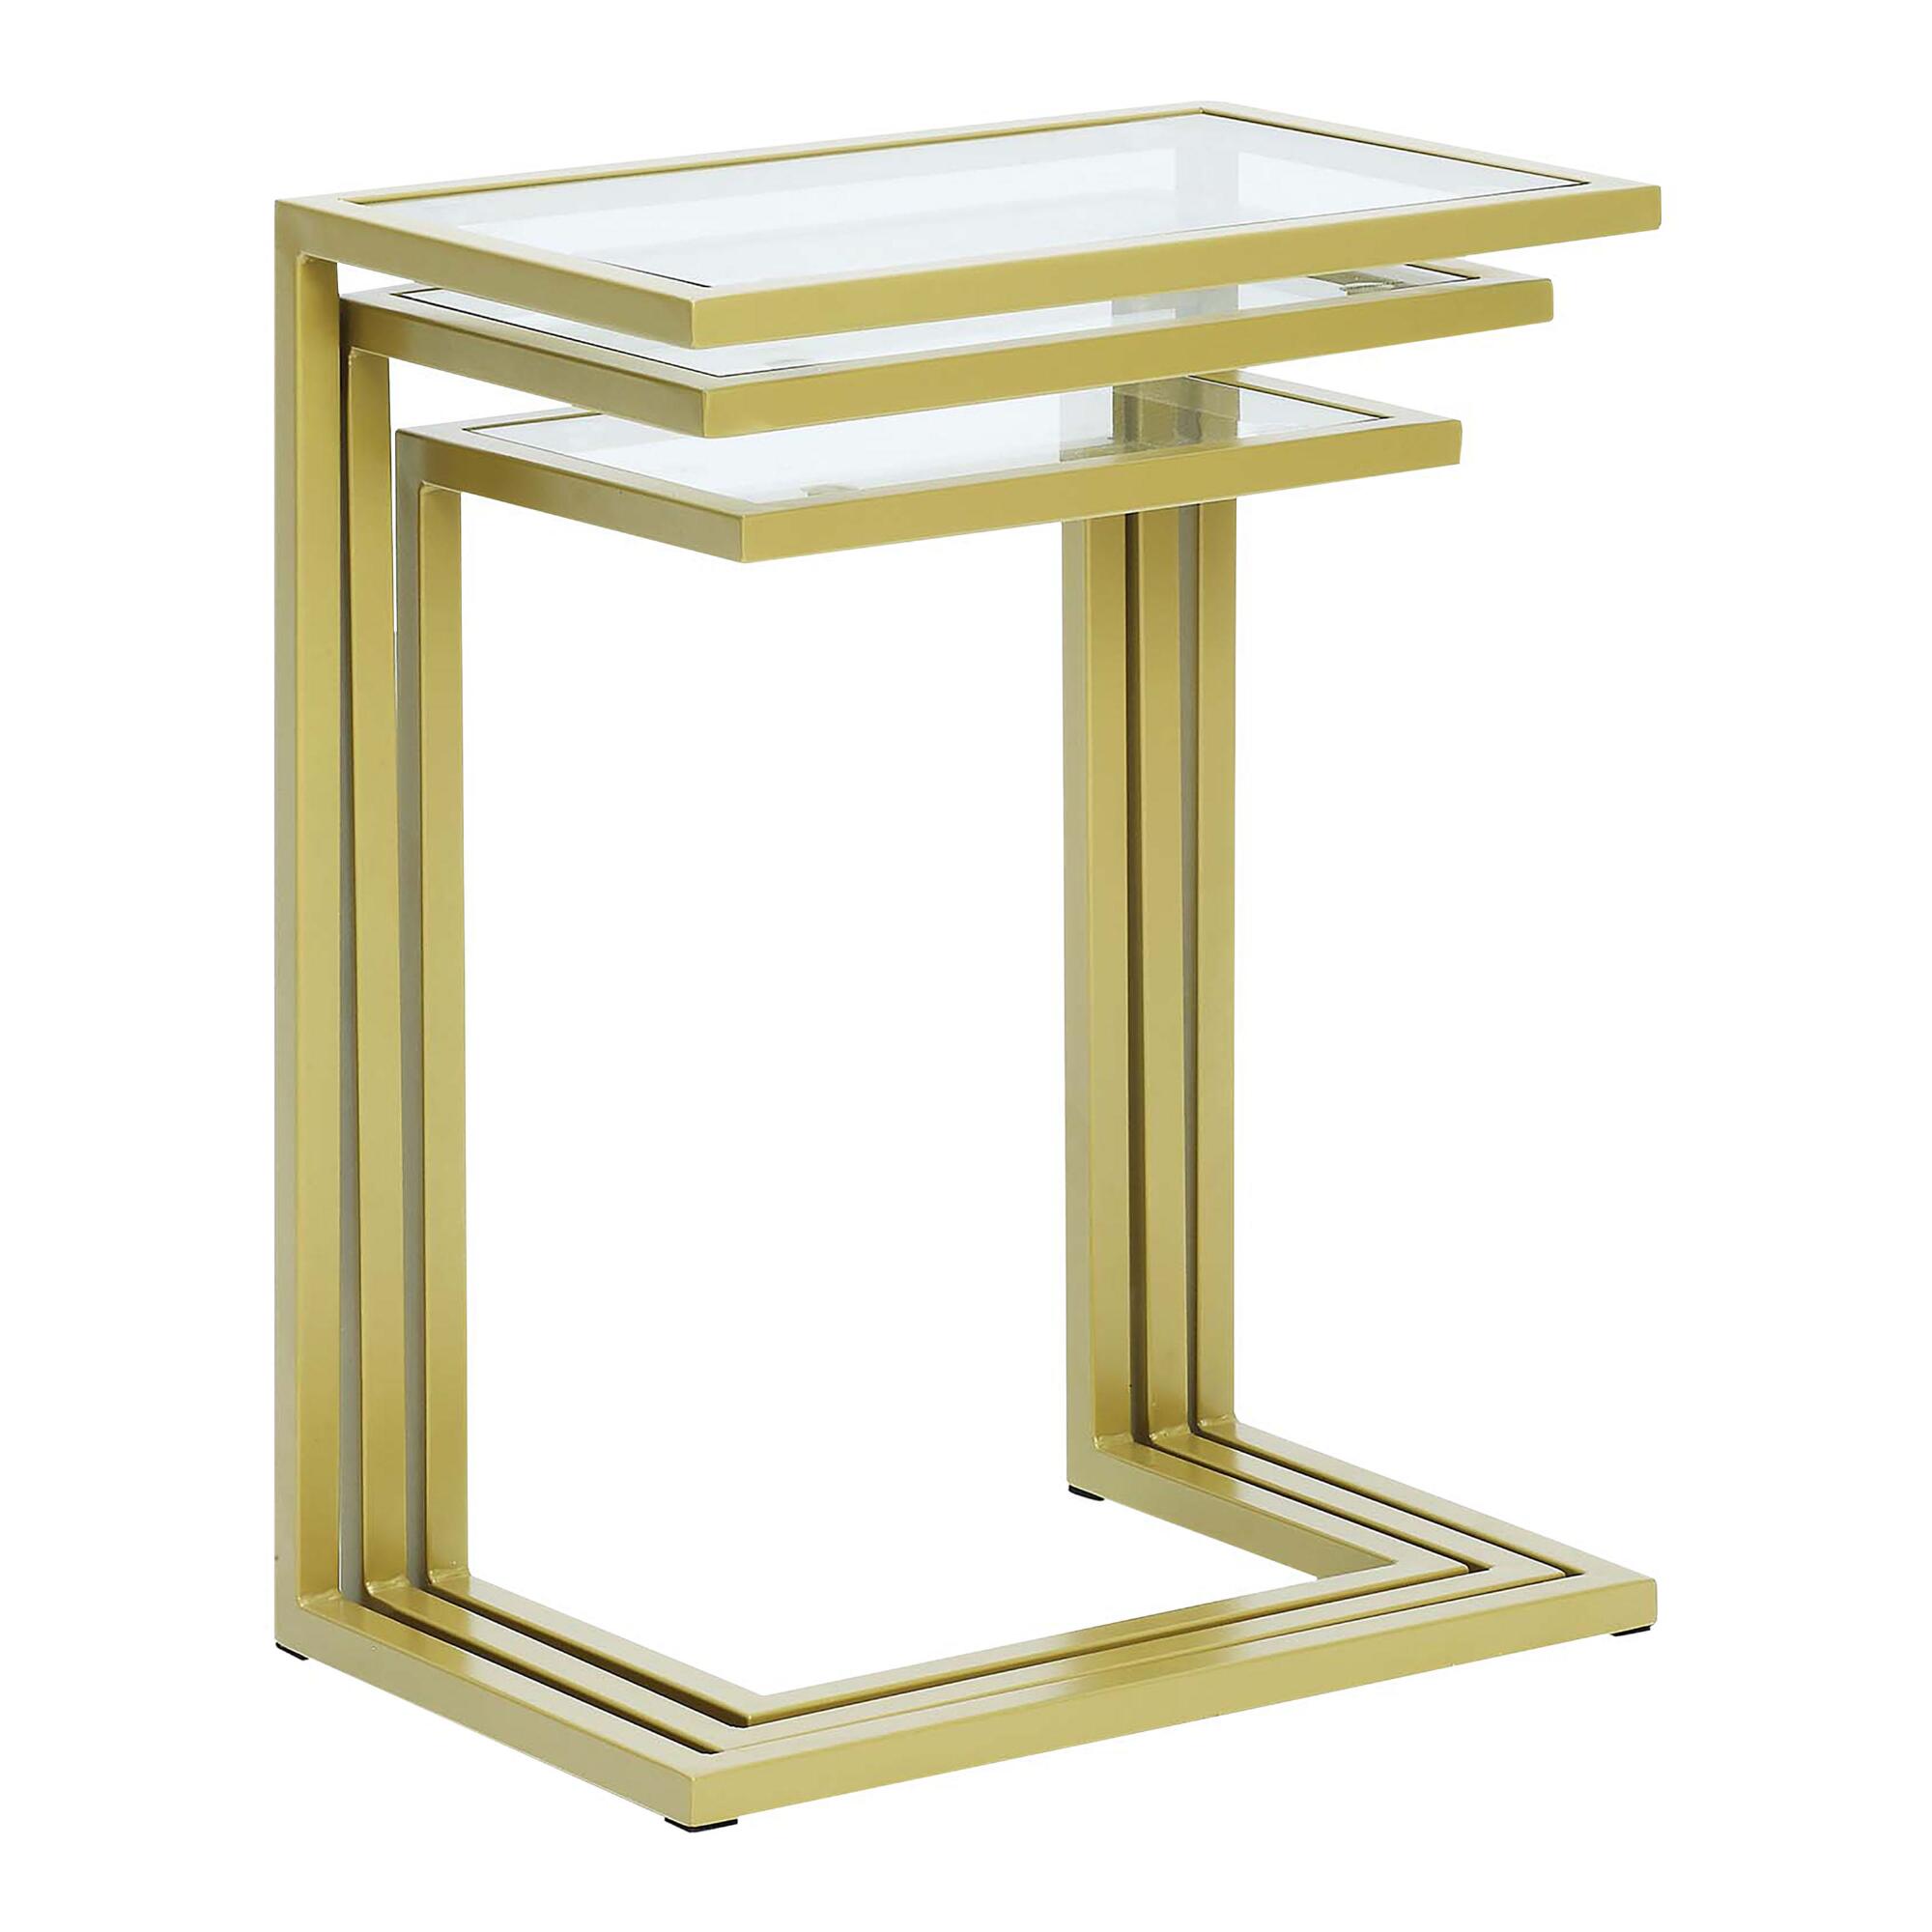 Gold Metal and Glass Top Nesting Tables Set Of 3 by World Market